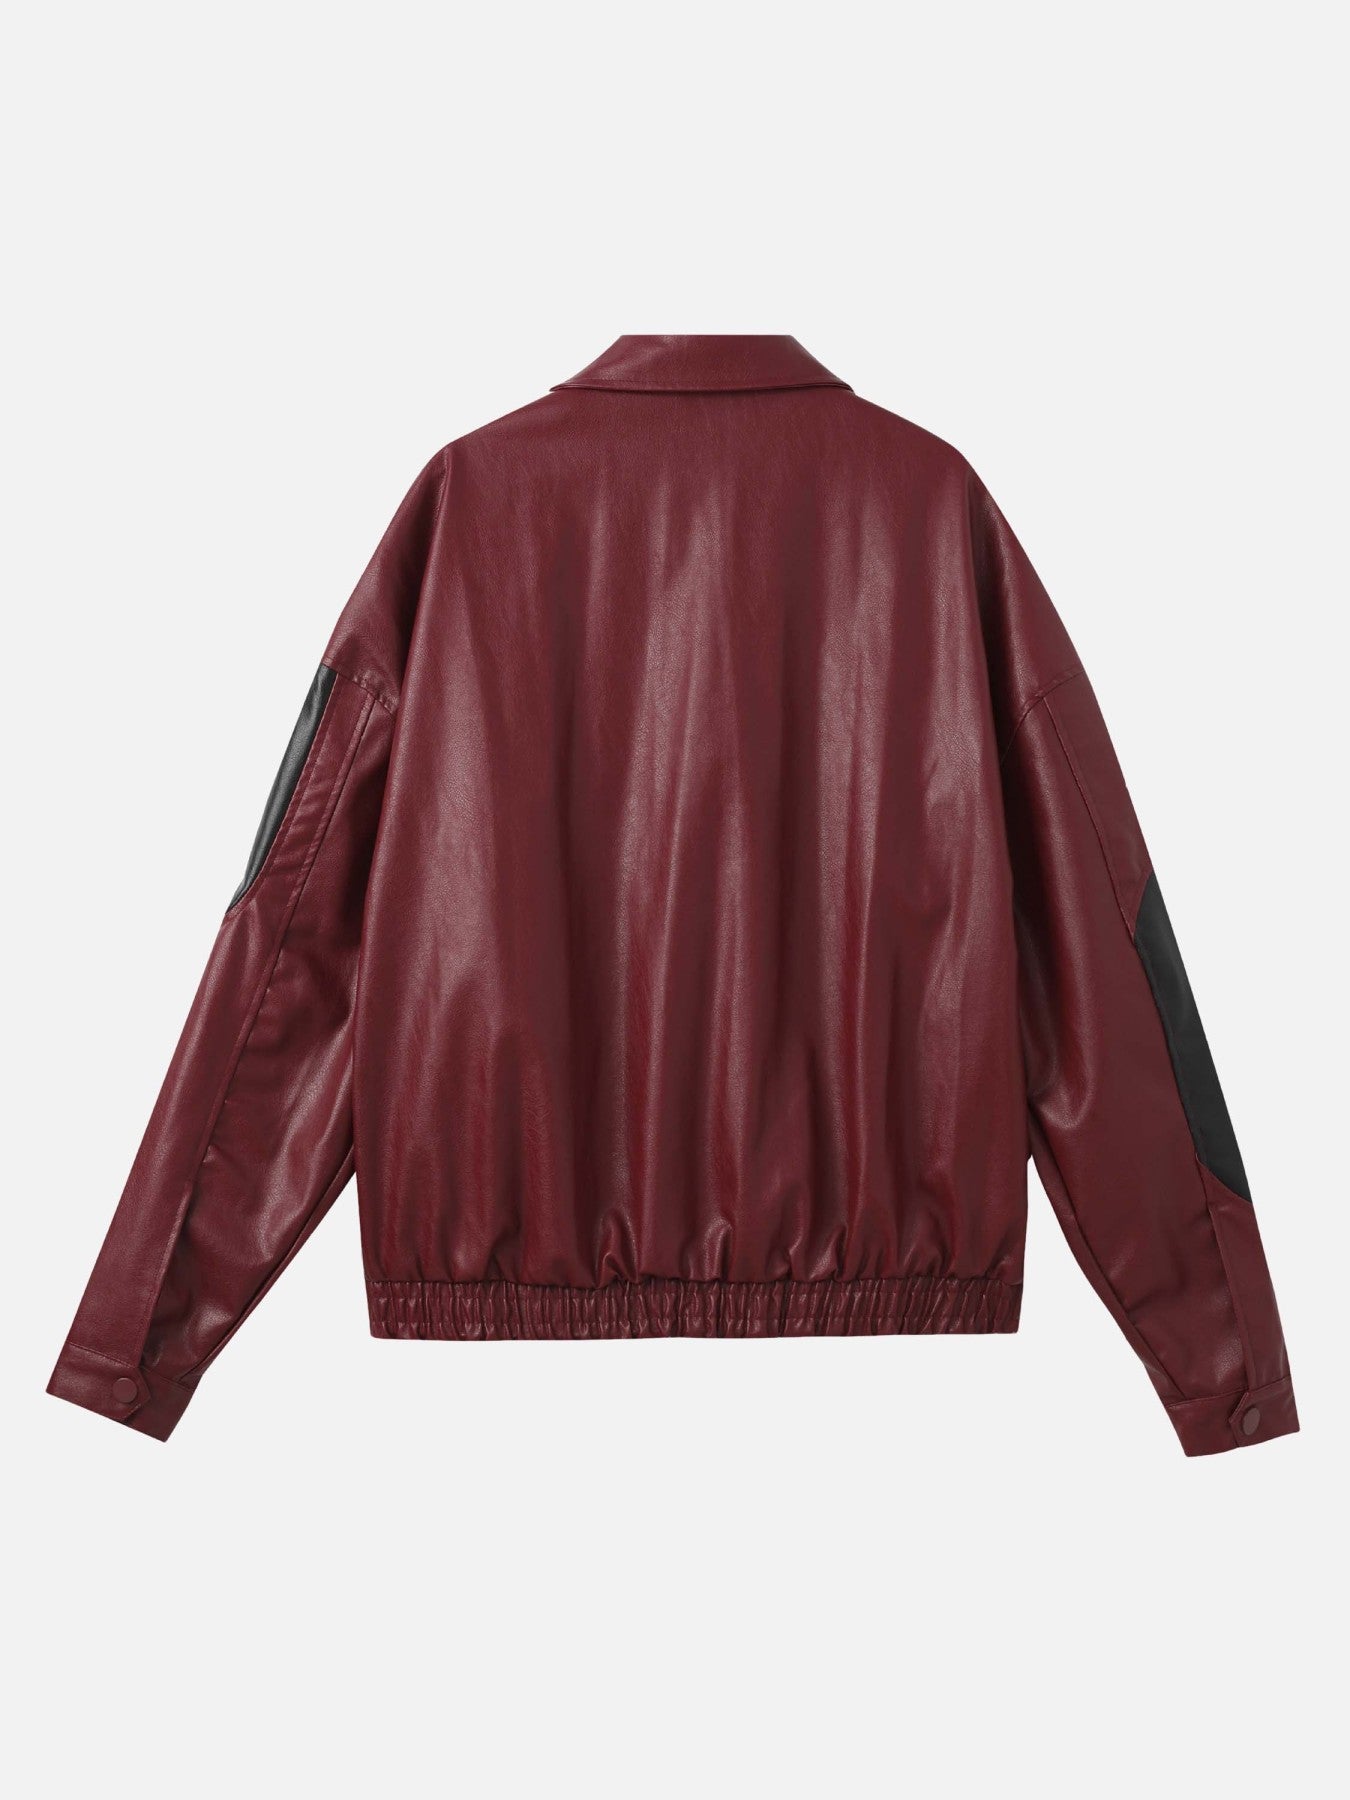 The Supermade Loose Patchwork PU Leather Jacket